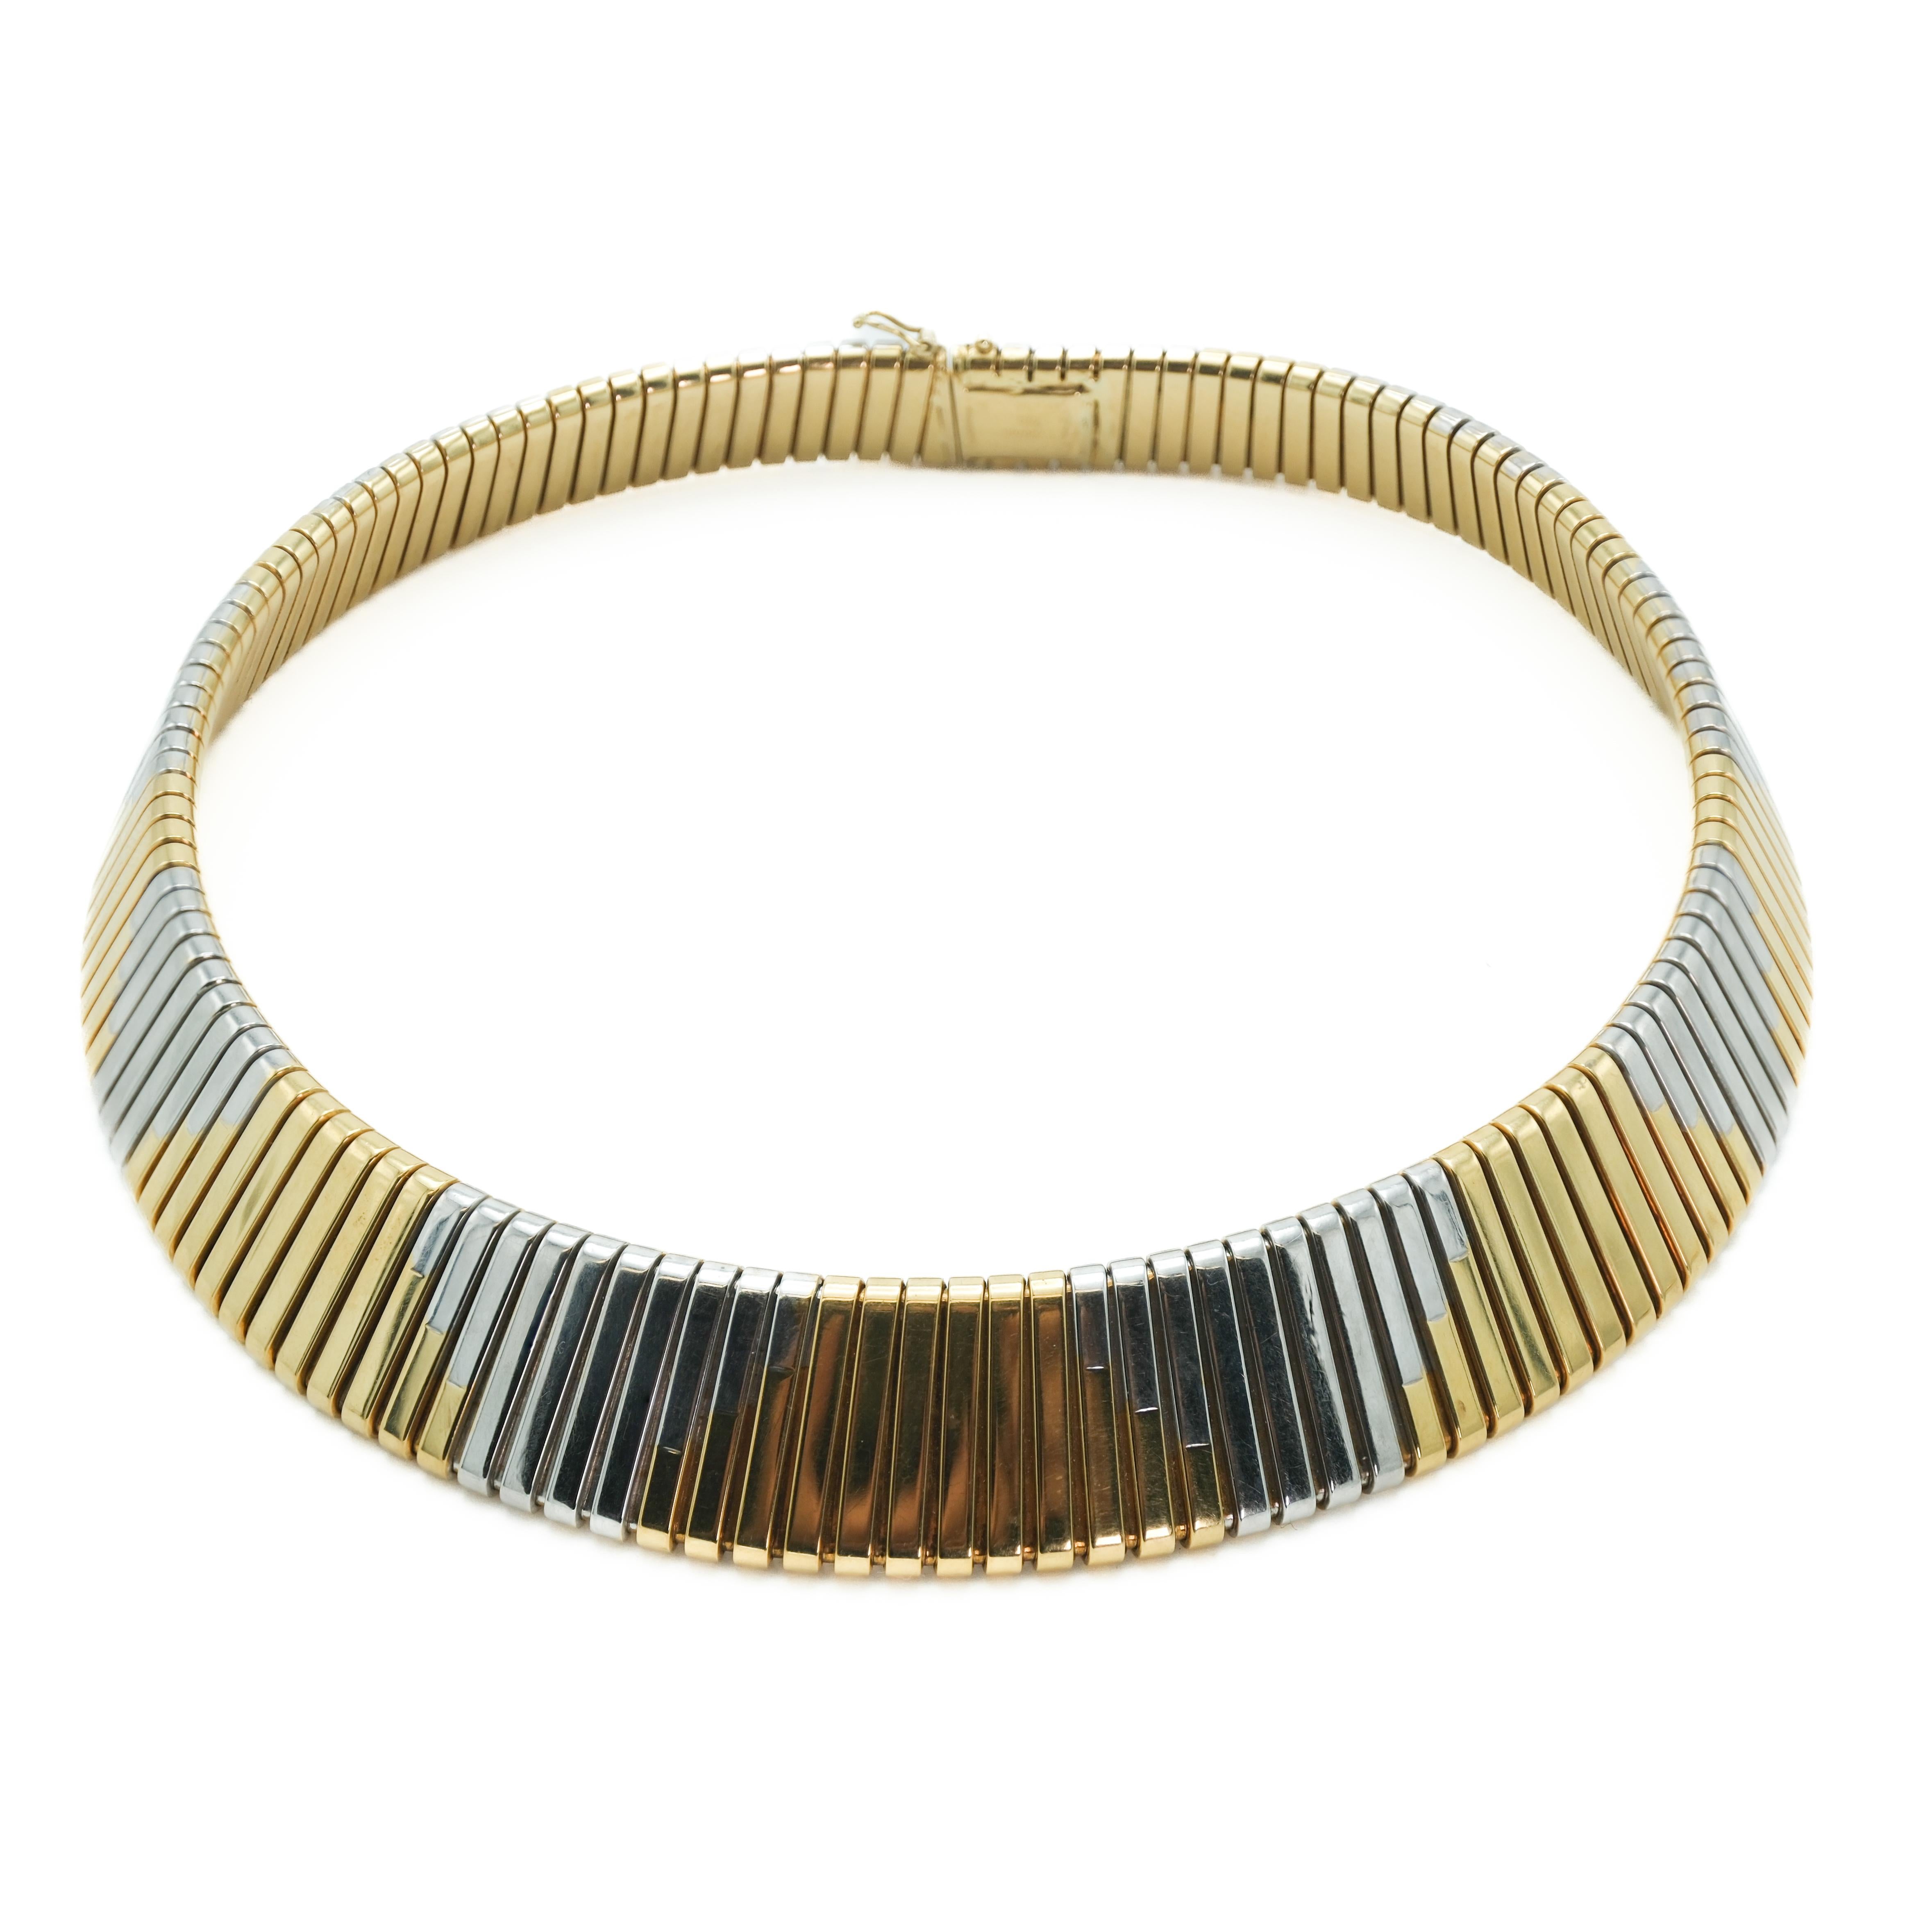 Fused together in the distinctive tubogas design, this rare two-tone Bvlgari choker is composed of 18-karat white and yellow gold. Resting comfortably against the collar bone, the necklace illustrates an engaging mix of warm and cool tones. Its